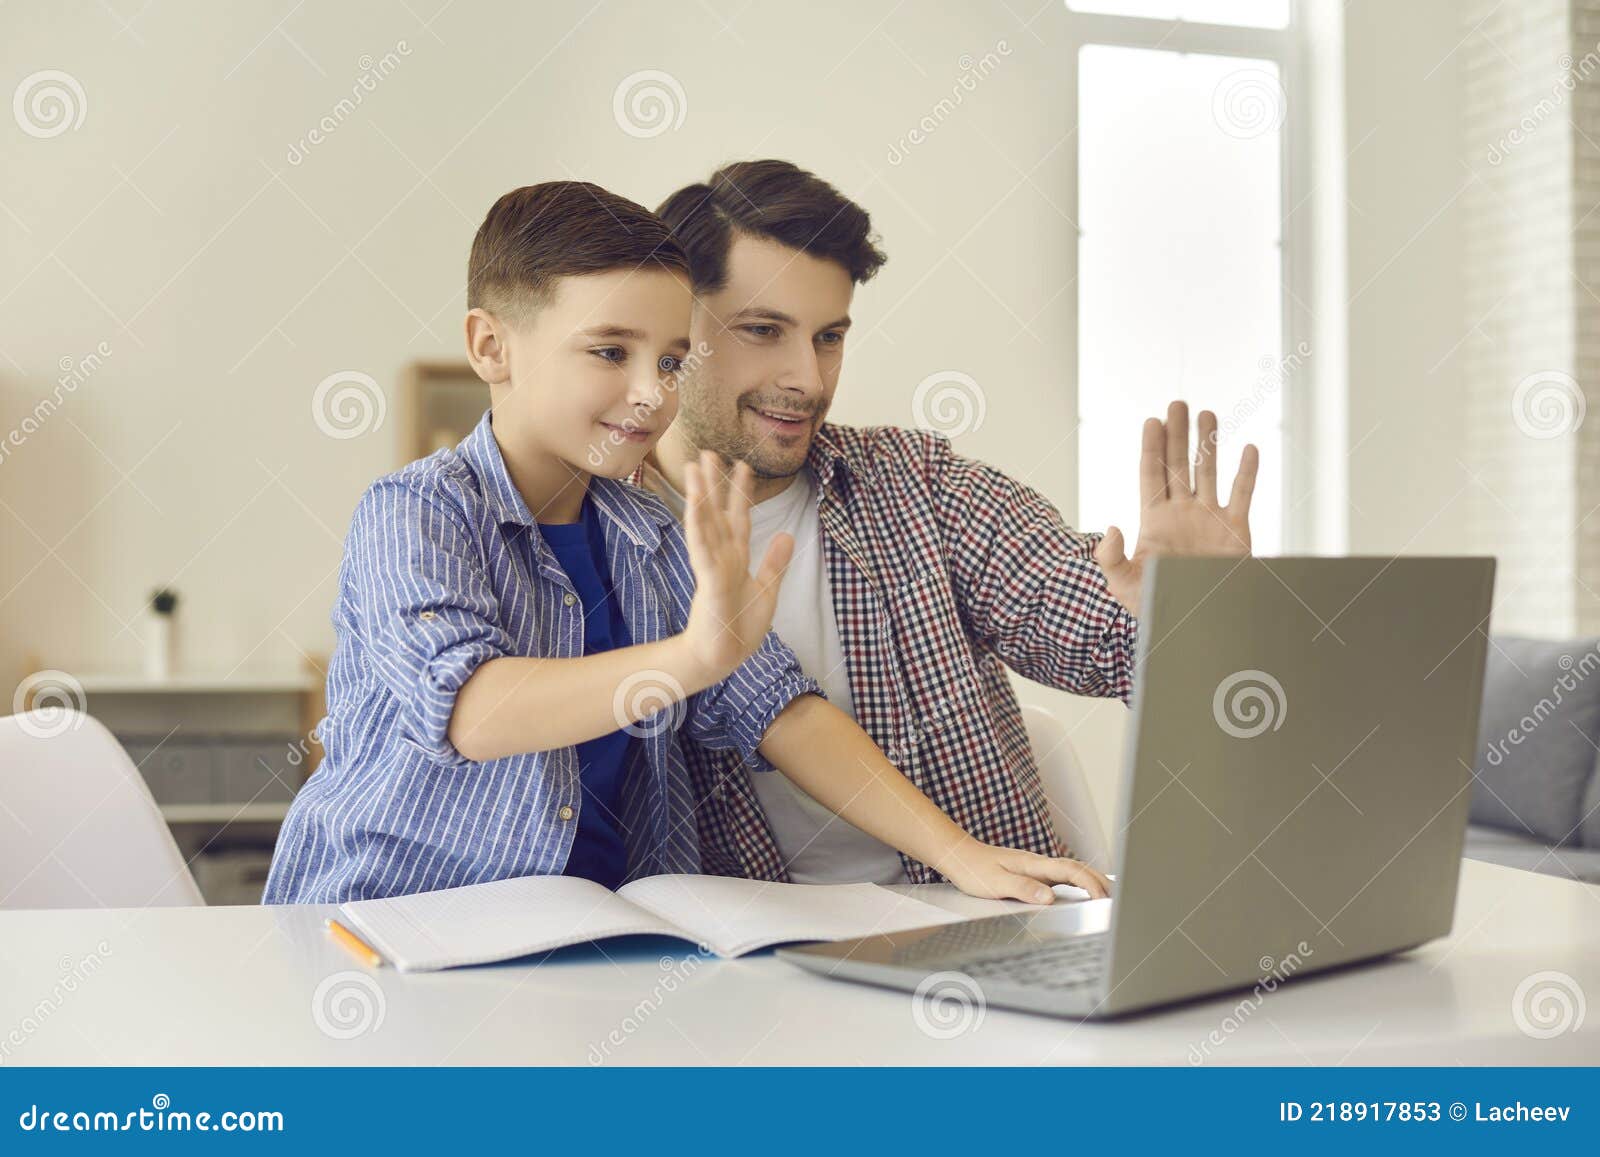 father and son wave greeting gesture talk to laptop web camera during video call